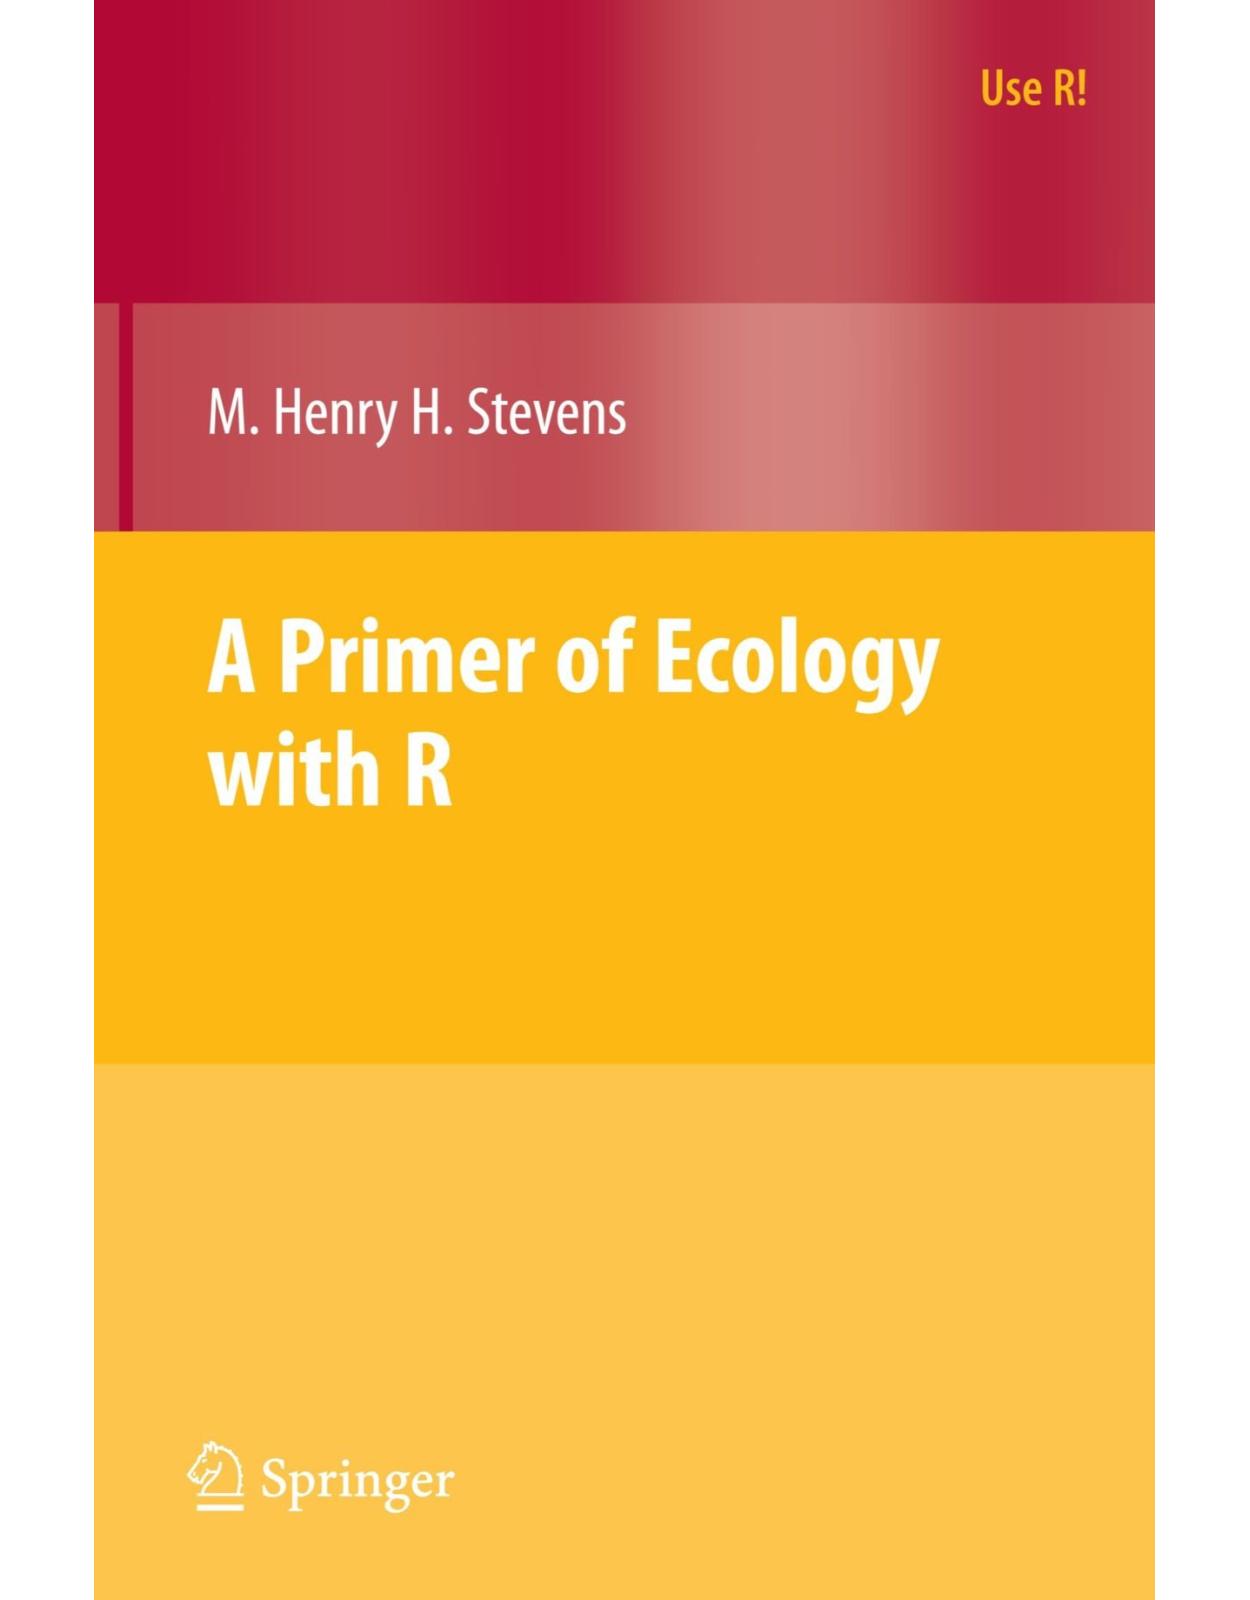 A Primer Of Ecology With R (Use R)